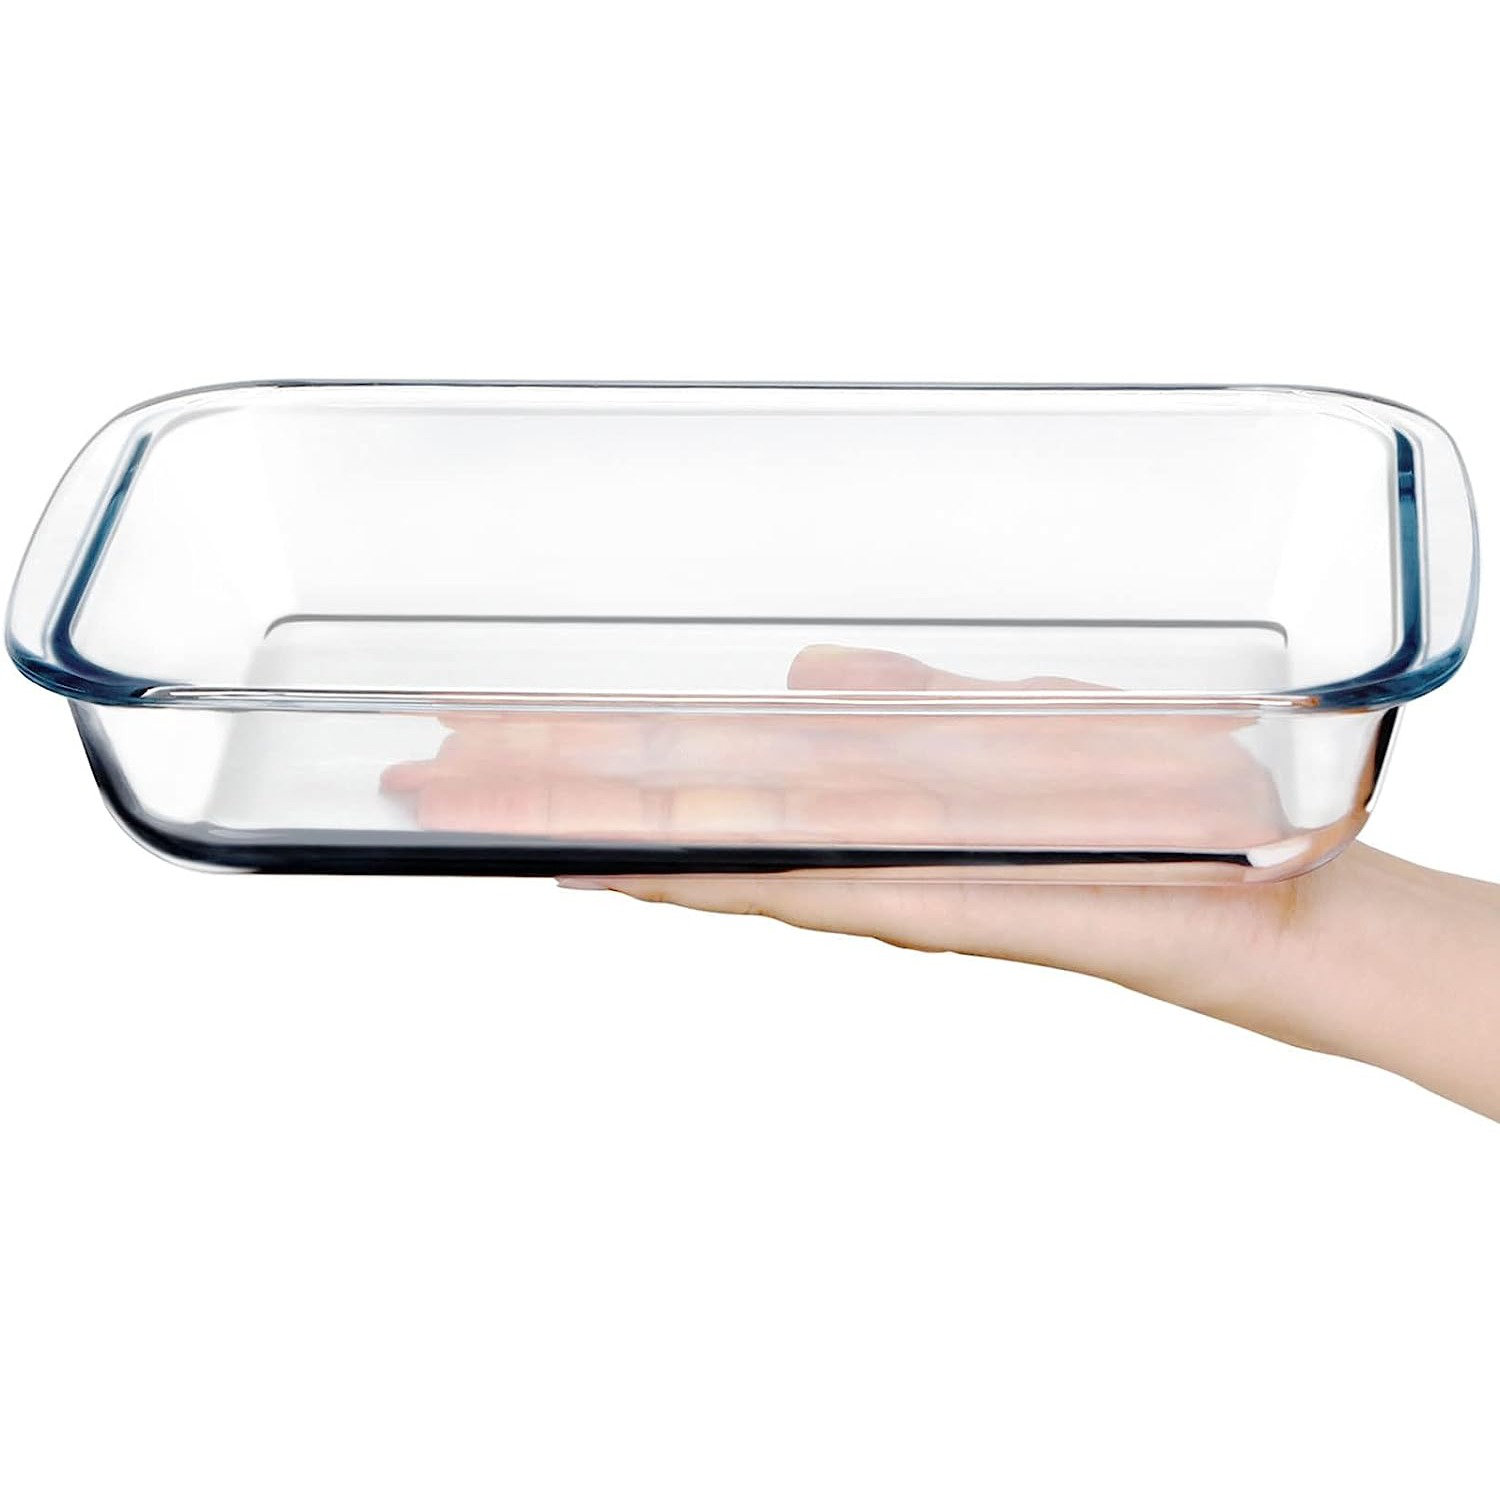  NUTRIUPS Glass Baking Dish Set for Oven Glass Pan for